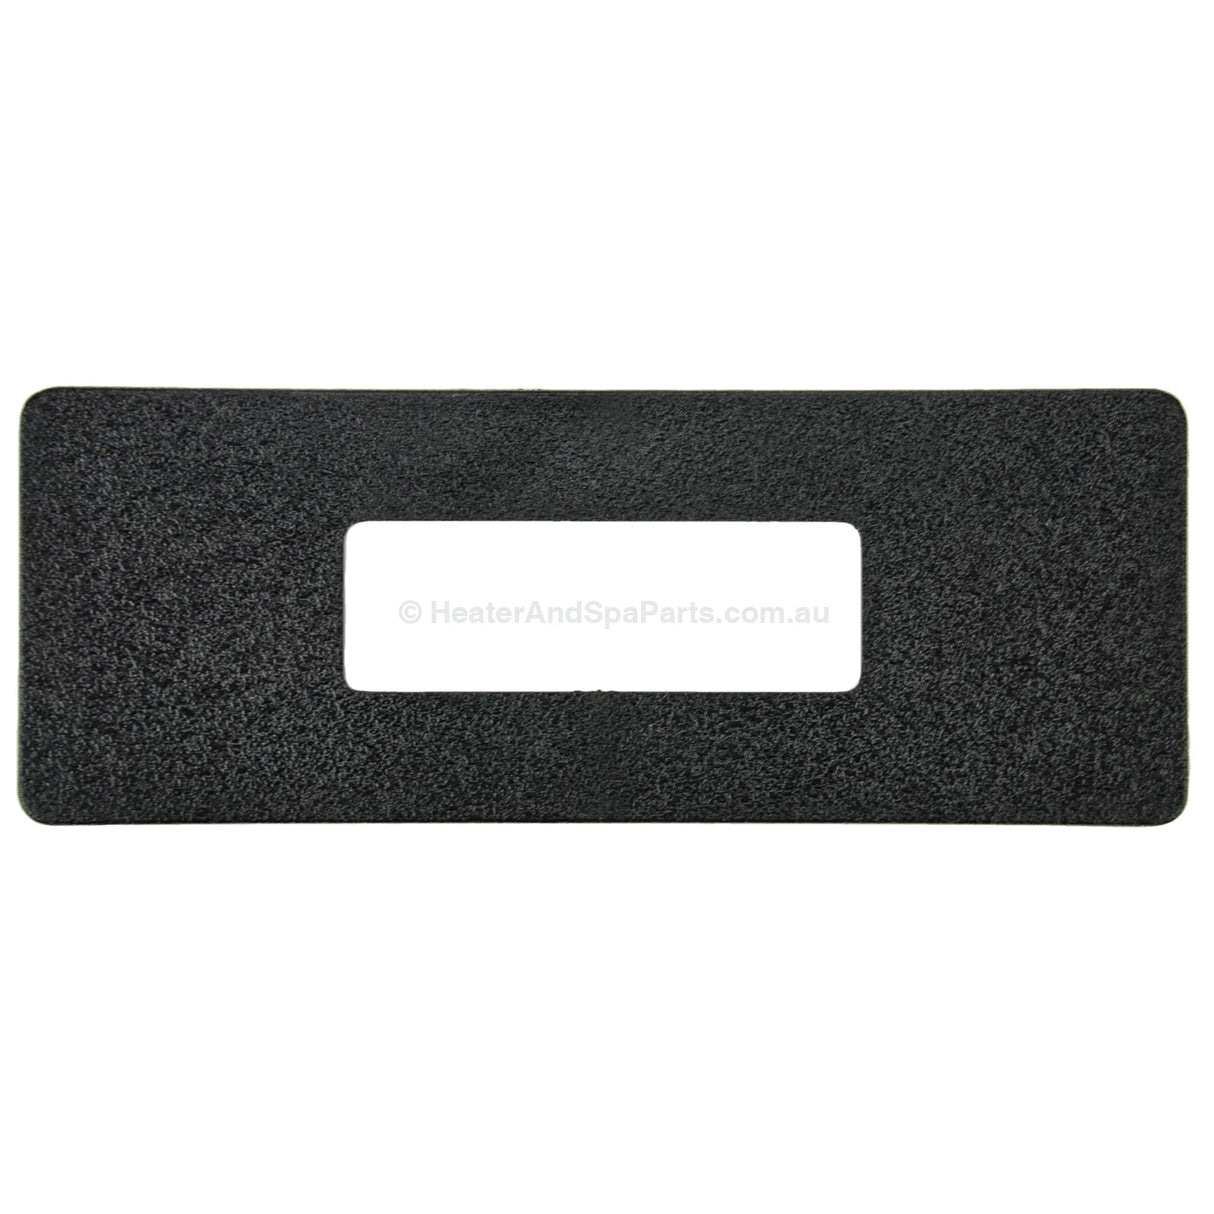 Spa Touchpad Adaptor Plate Facias - Various Sizes 207Mm X 72Mm (Hole Size 95Mm 26Mm)